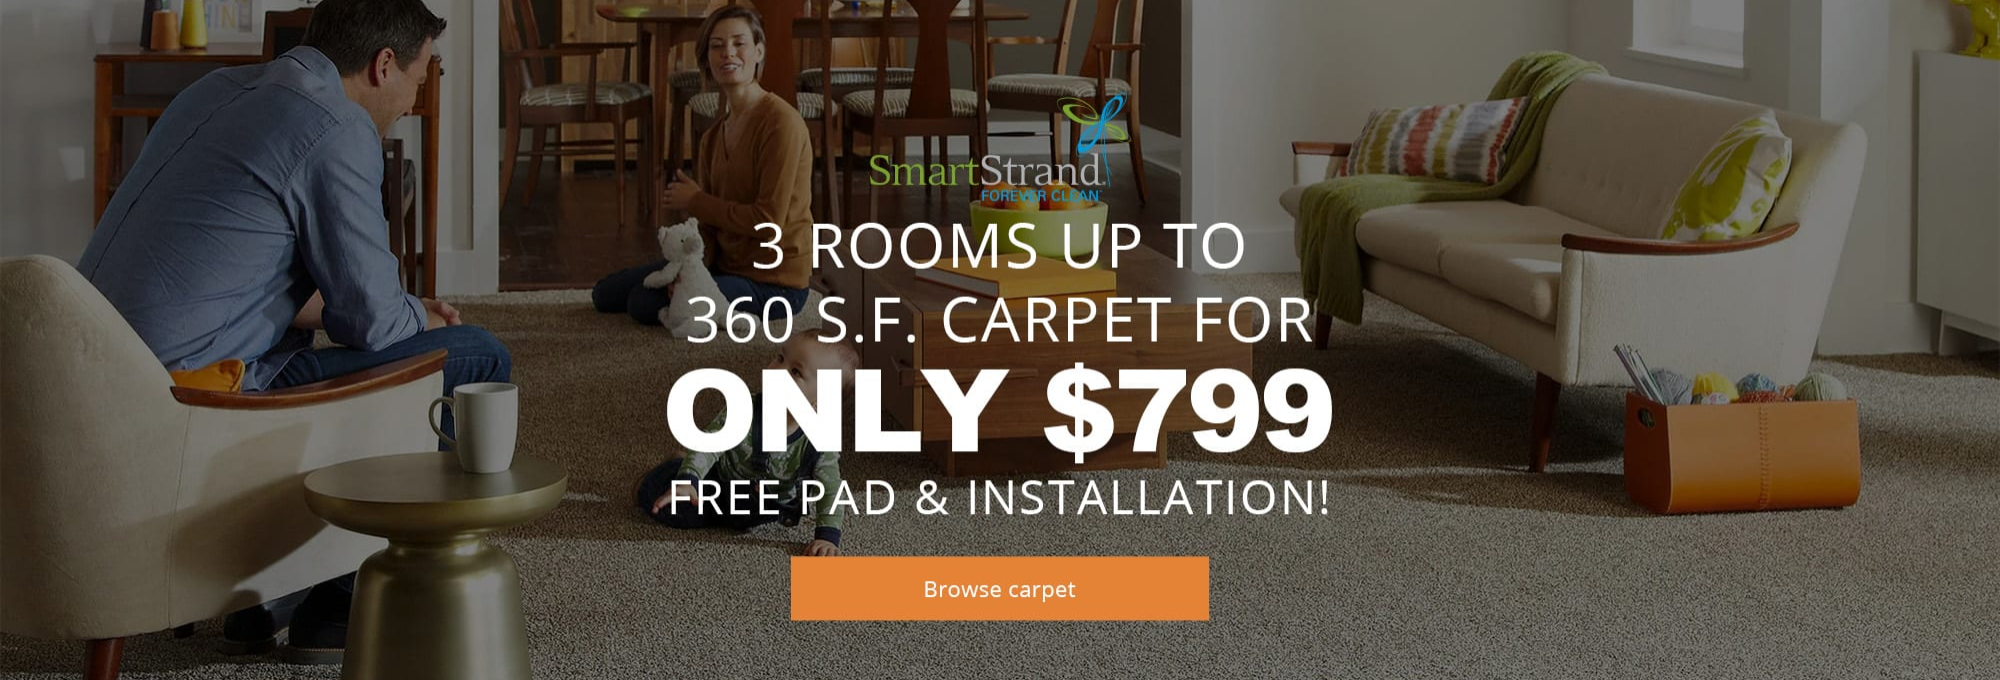 Up to 3 rooms of carpet for only $799, free pad and installation! Browse carpet.